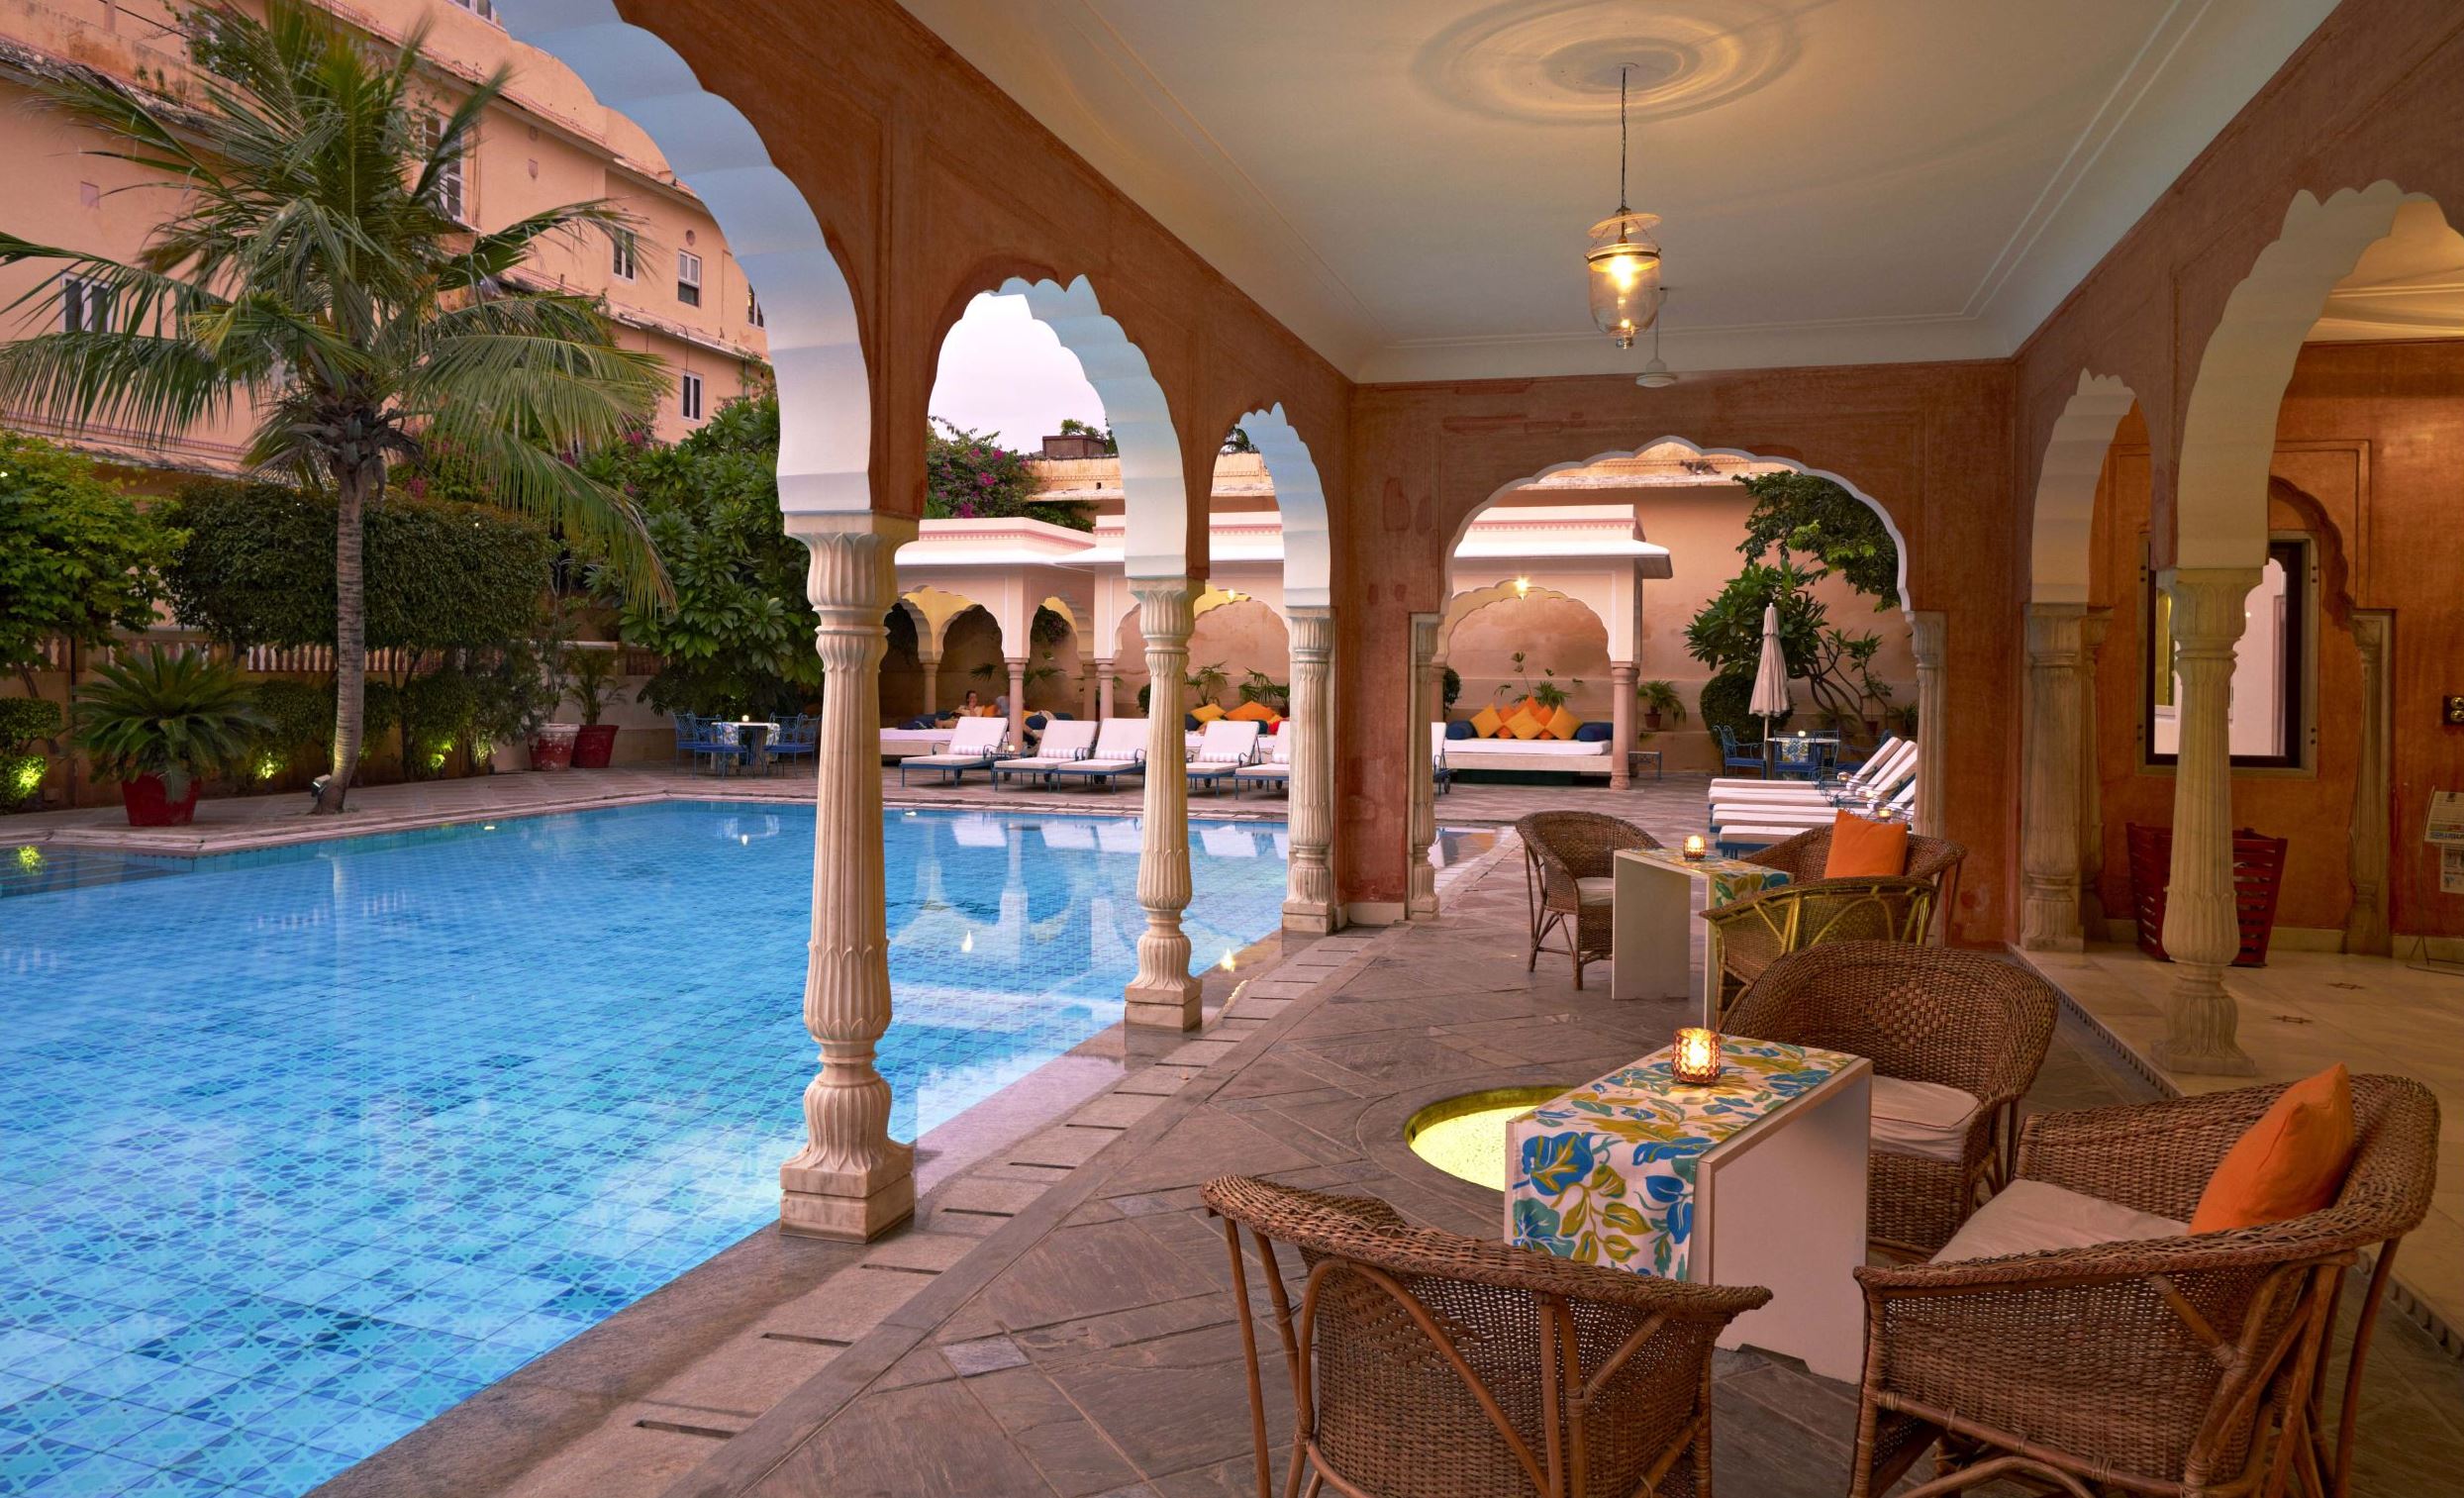 Swimming pool and terrace at the Samode Haveli hotel in Jaipur India